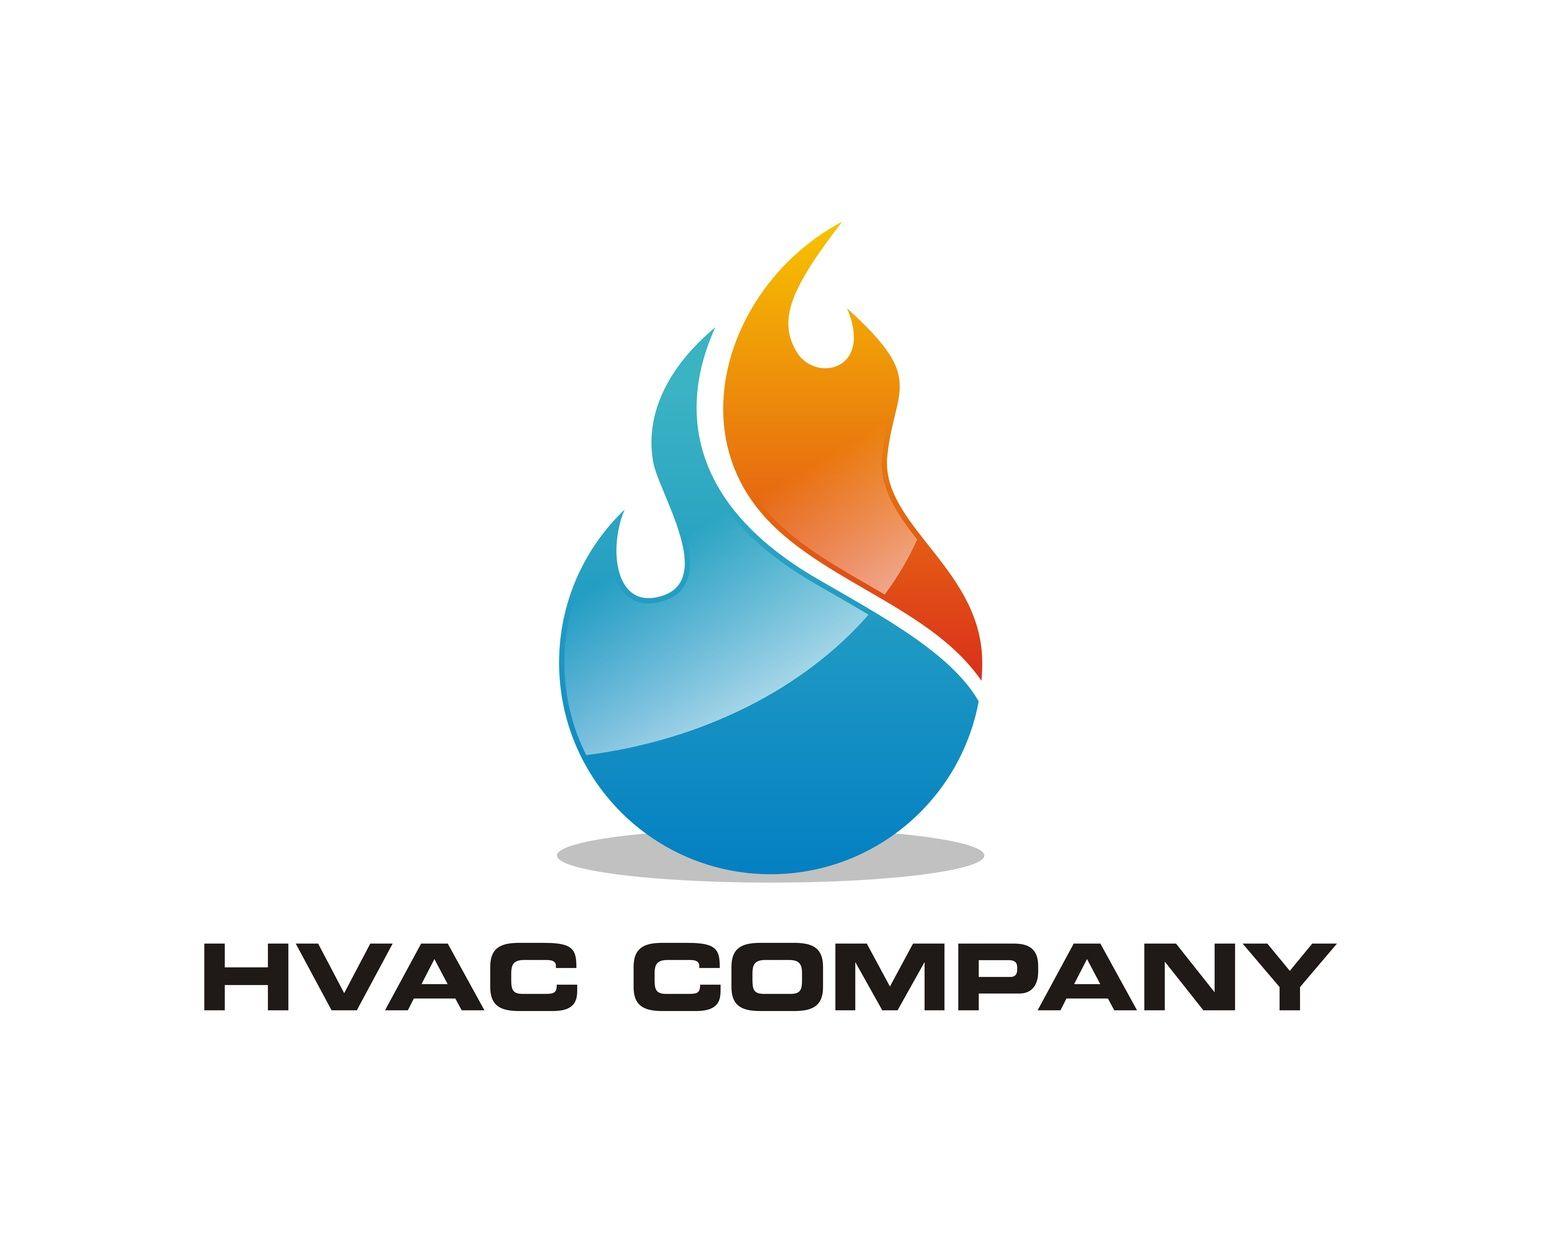 HVAC Logo - Developing a Brand in a Crowded Market With a Great HVAC Logo